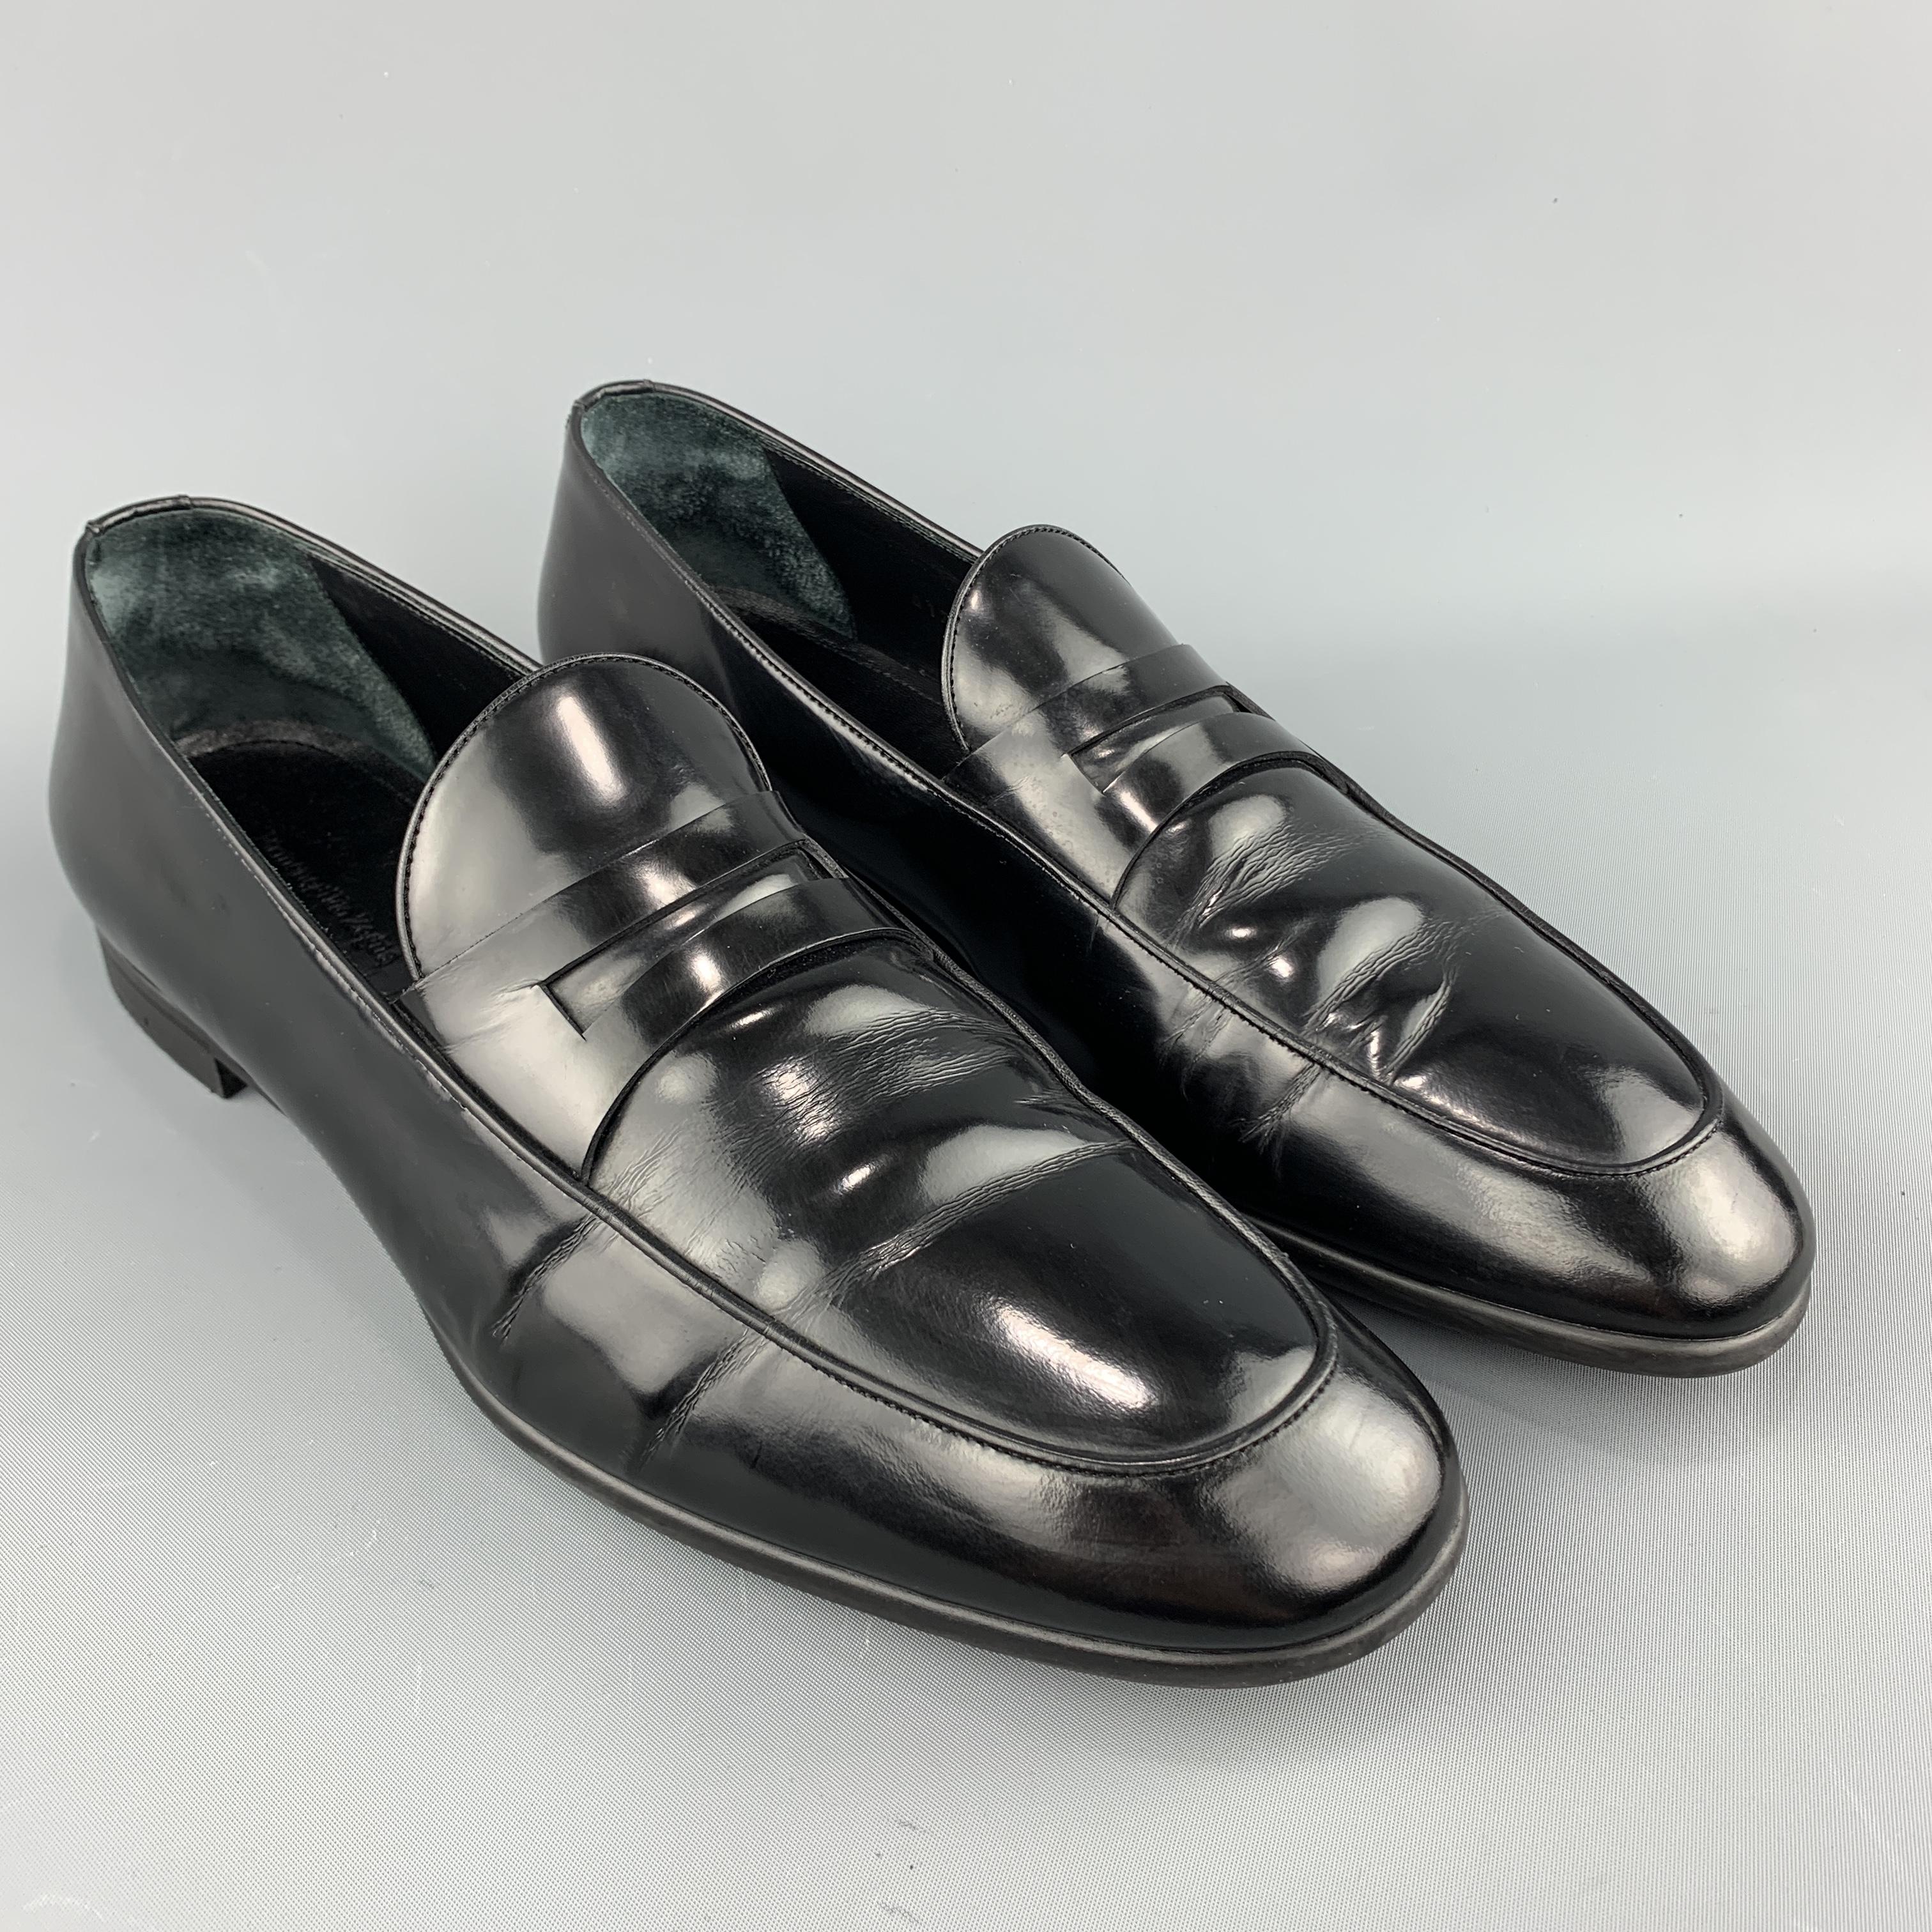 ERMENEGILDO ZEGNA loafers come in black patent leather with an apron toe, penny strap and rubber sole. With box. Made in Italy.
 
Good Pre-Owned Condition.
Marked: 9.5
 
Outsole: 12.25 x 4 in.